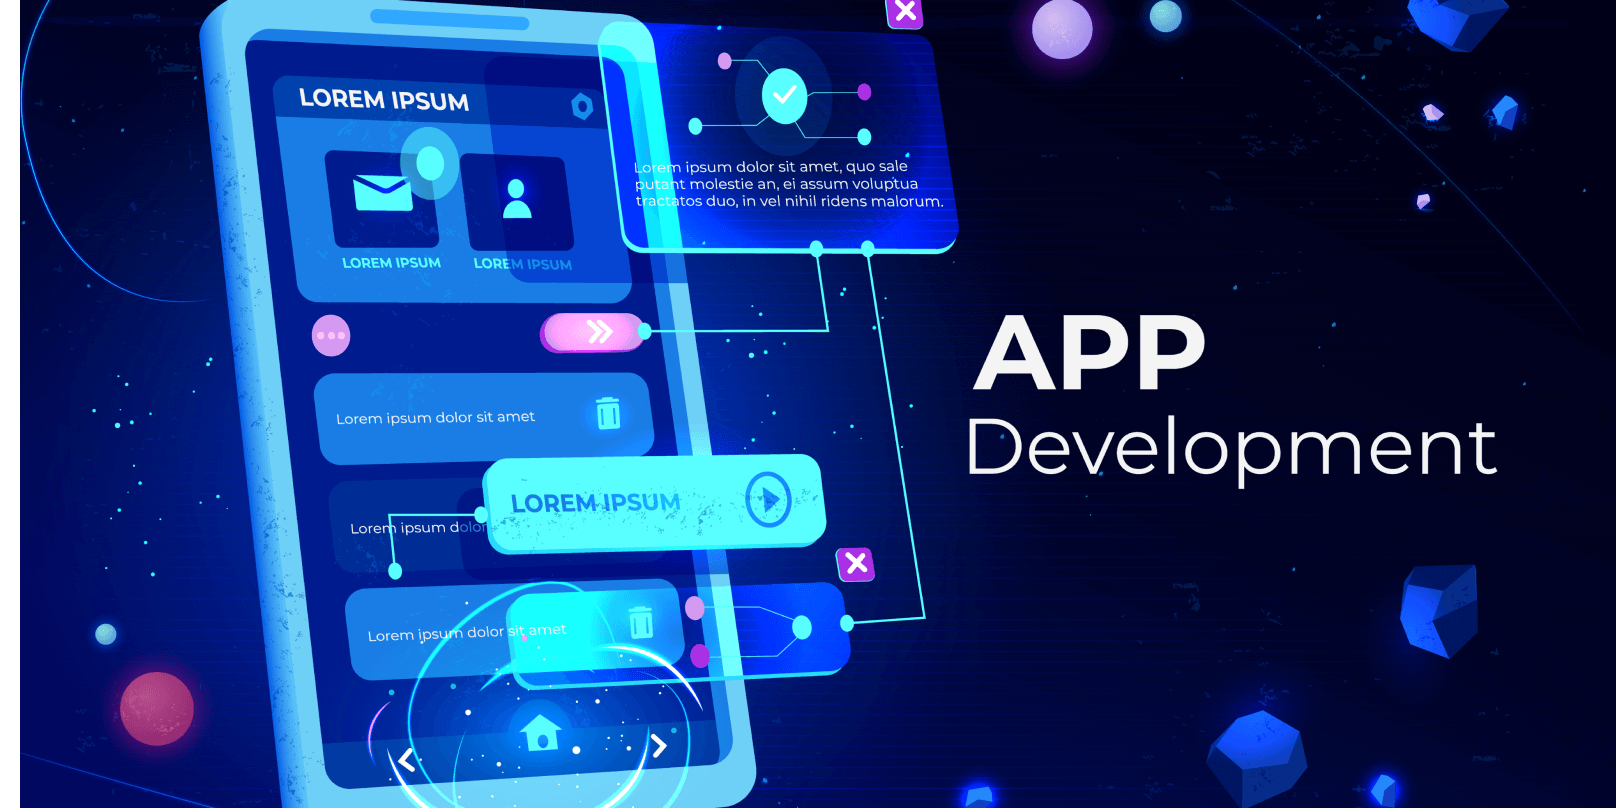 How Does Complete Mobile App Development Process Look Like?